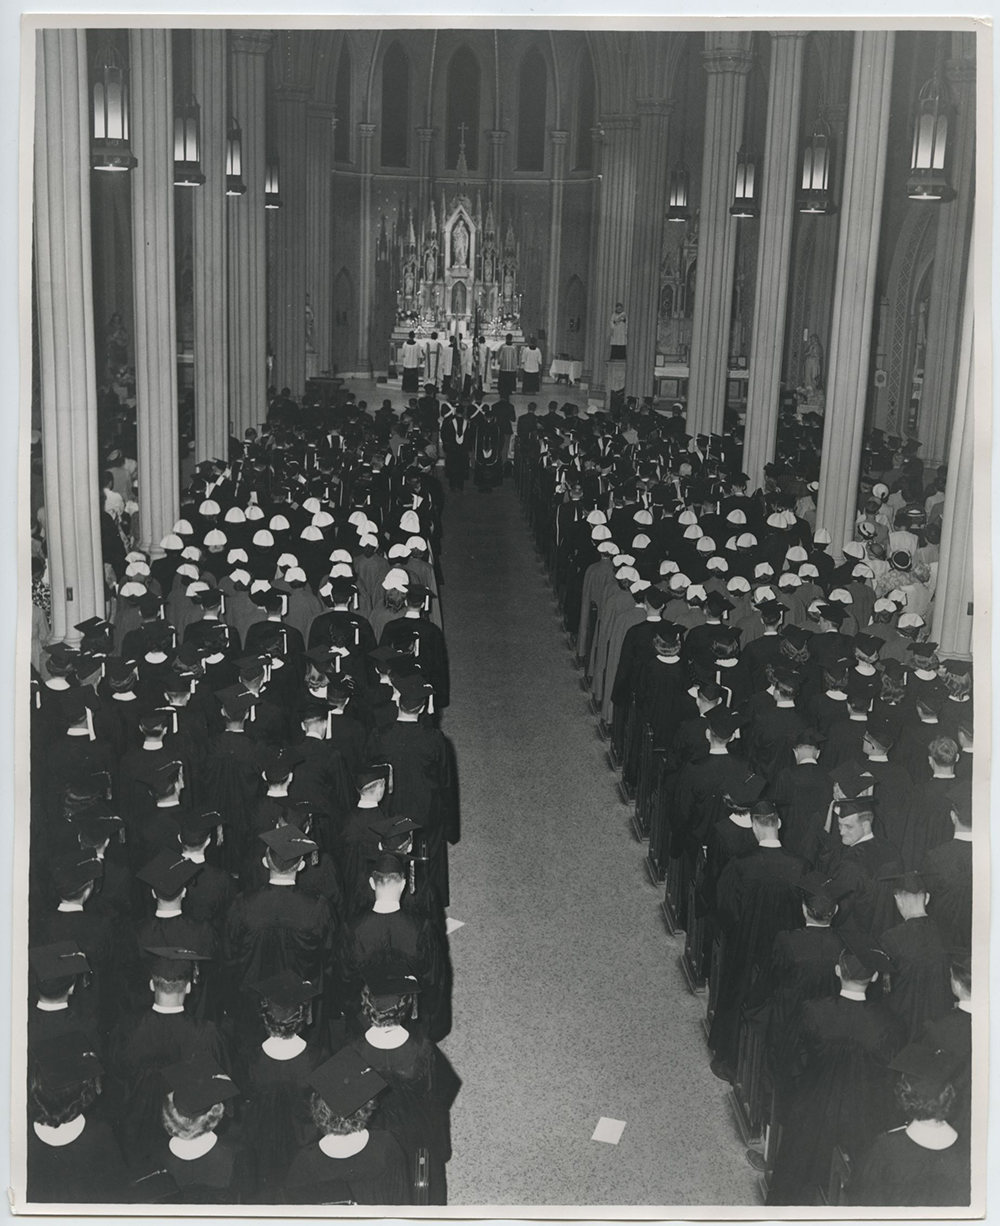 Image of Creighton graduation from the 1940s and 1950s.